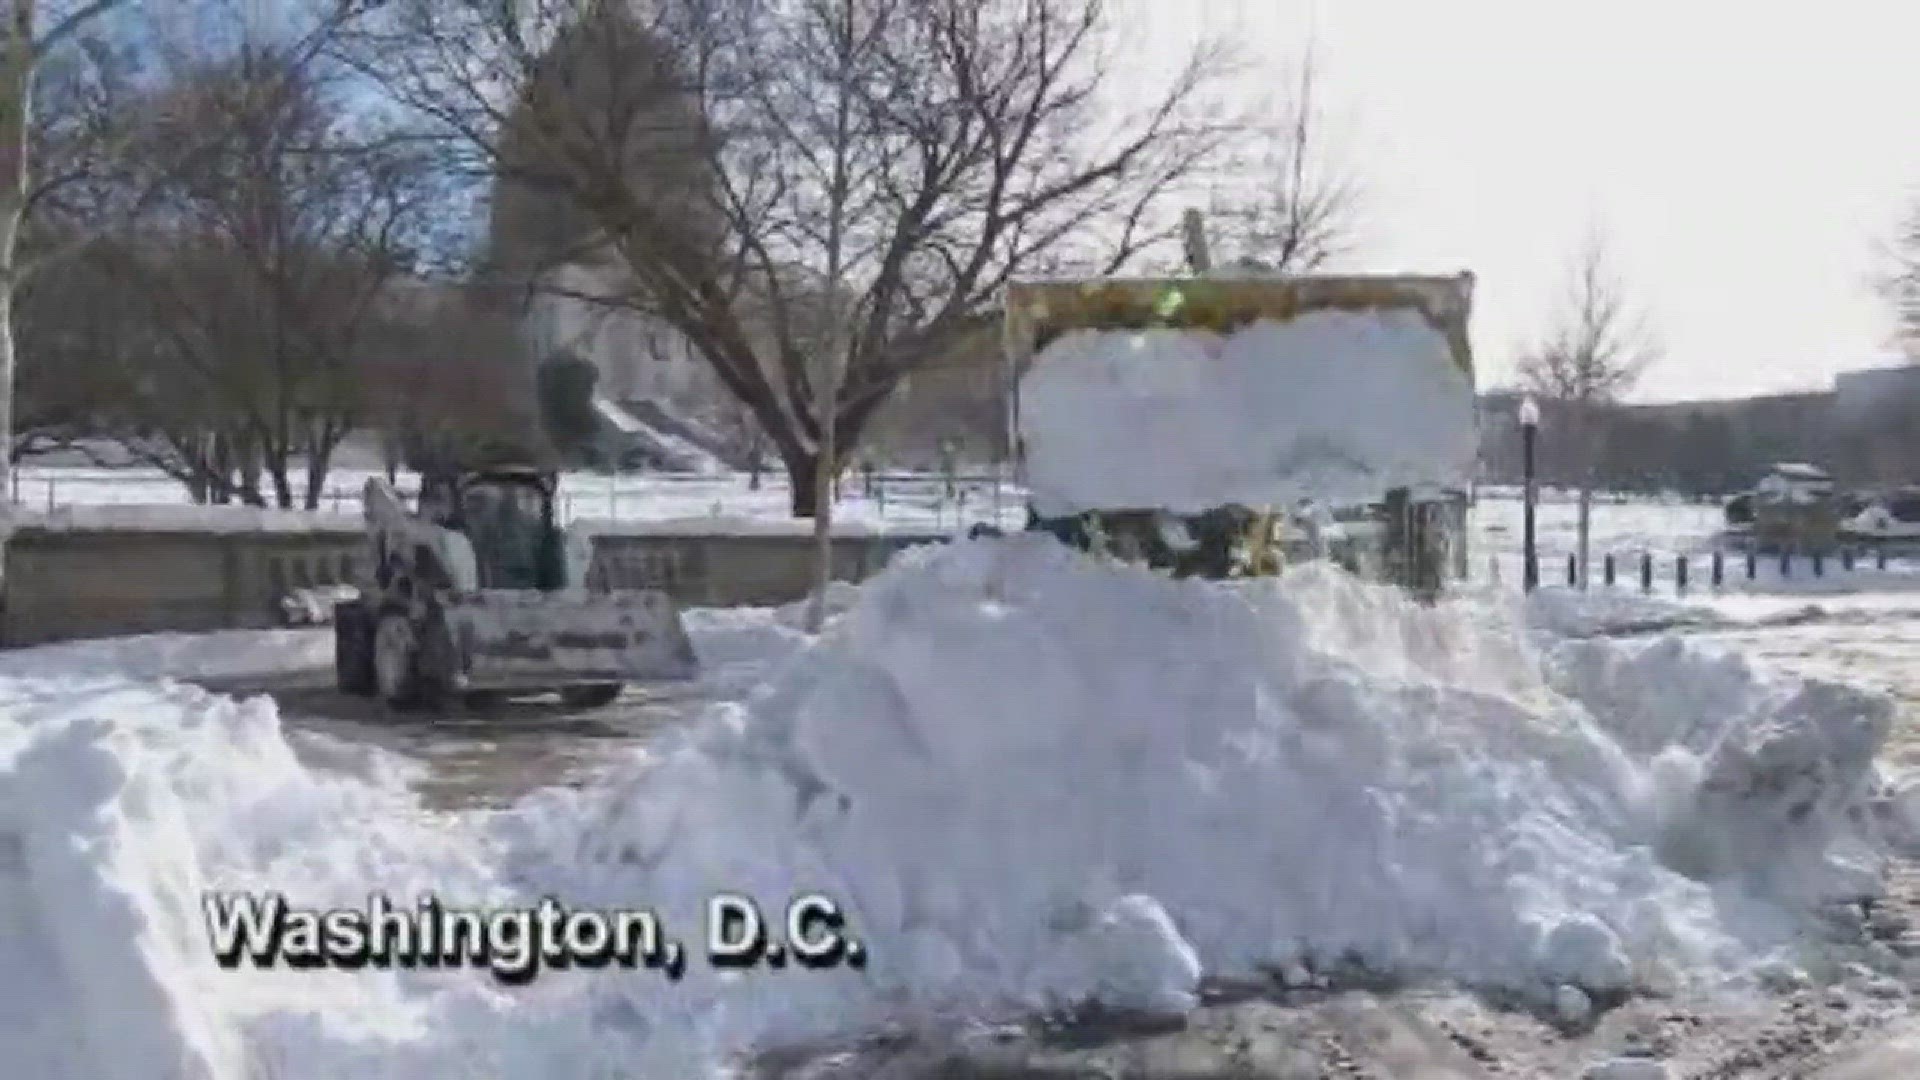 The sound of heavy equipment clearing snow was in the air from Washington, D.C. to New York Monday.